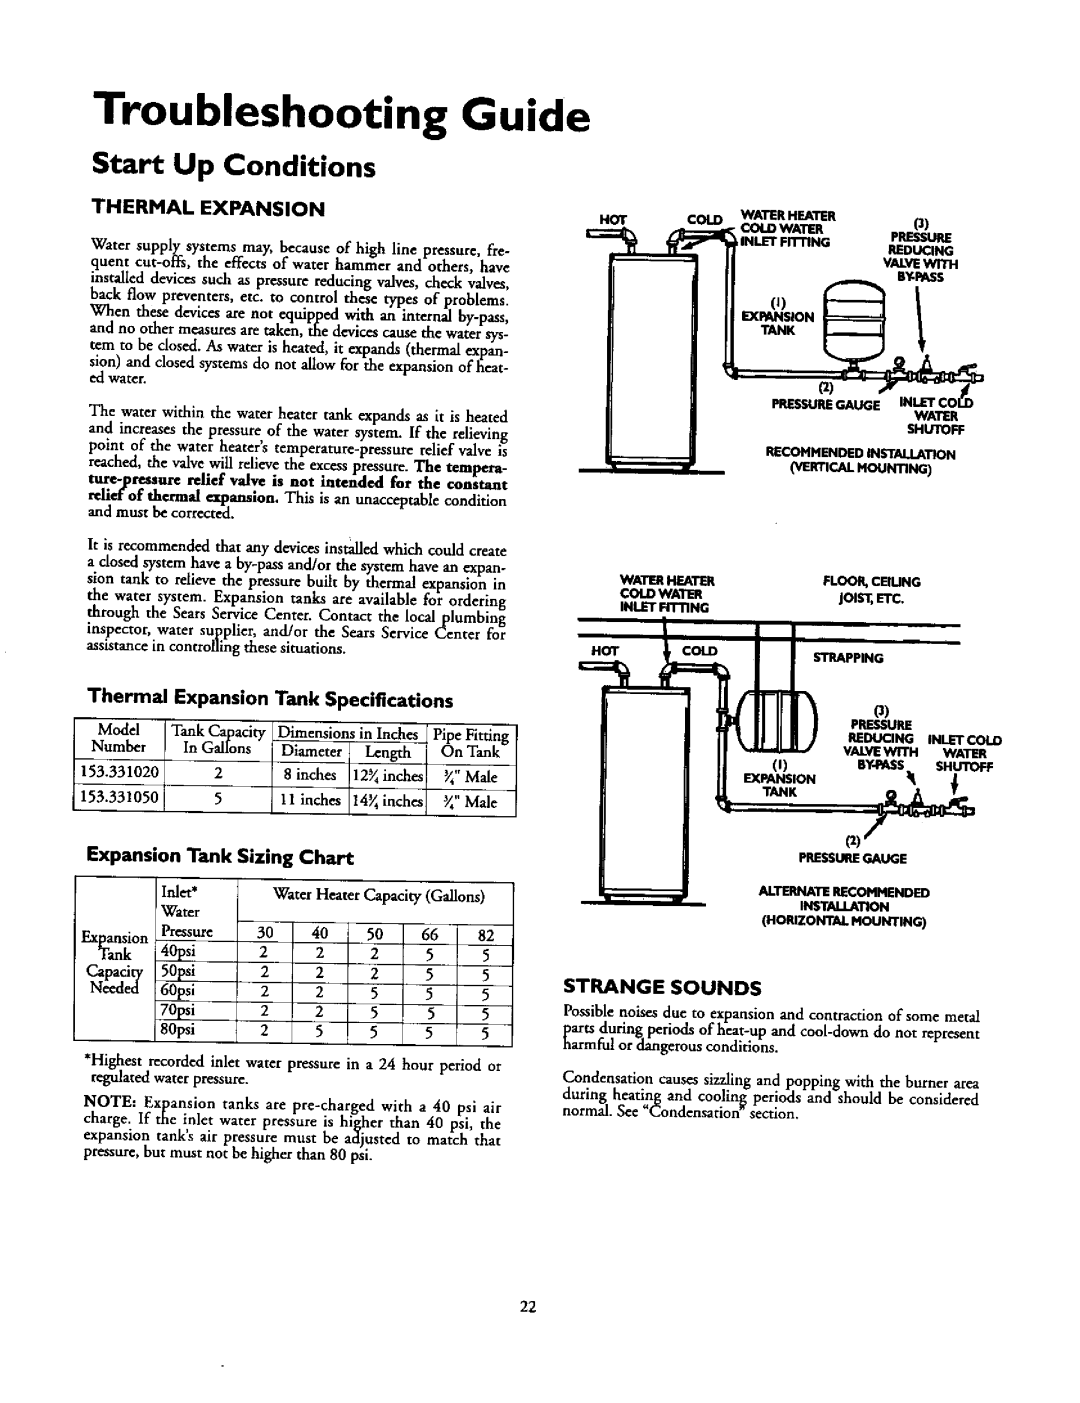 Kenmore 153.336751 Troubleshooting Guide, Start Up Conditions, Thermal Expansion, COlDW ,TIR, Expansion Tank Sizing, Chart 